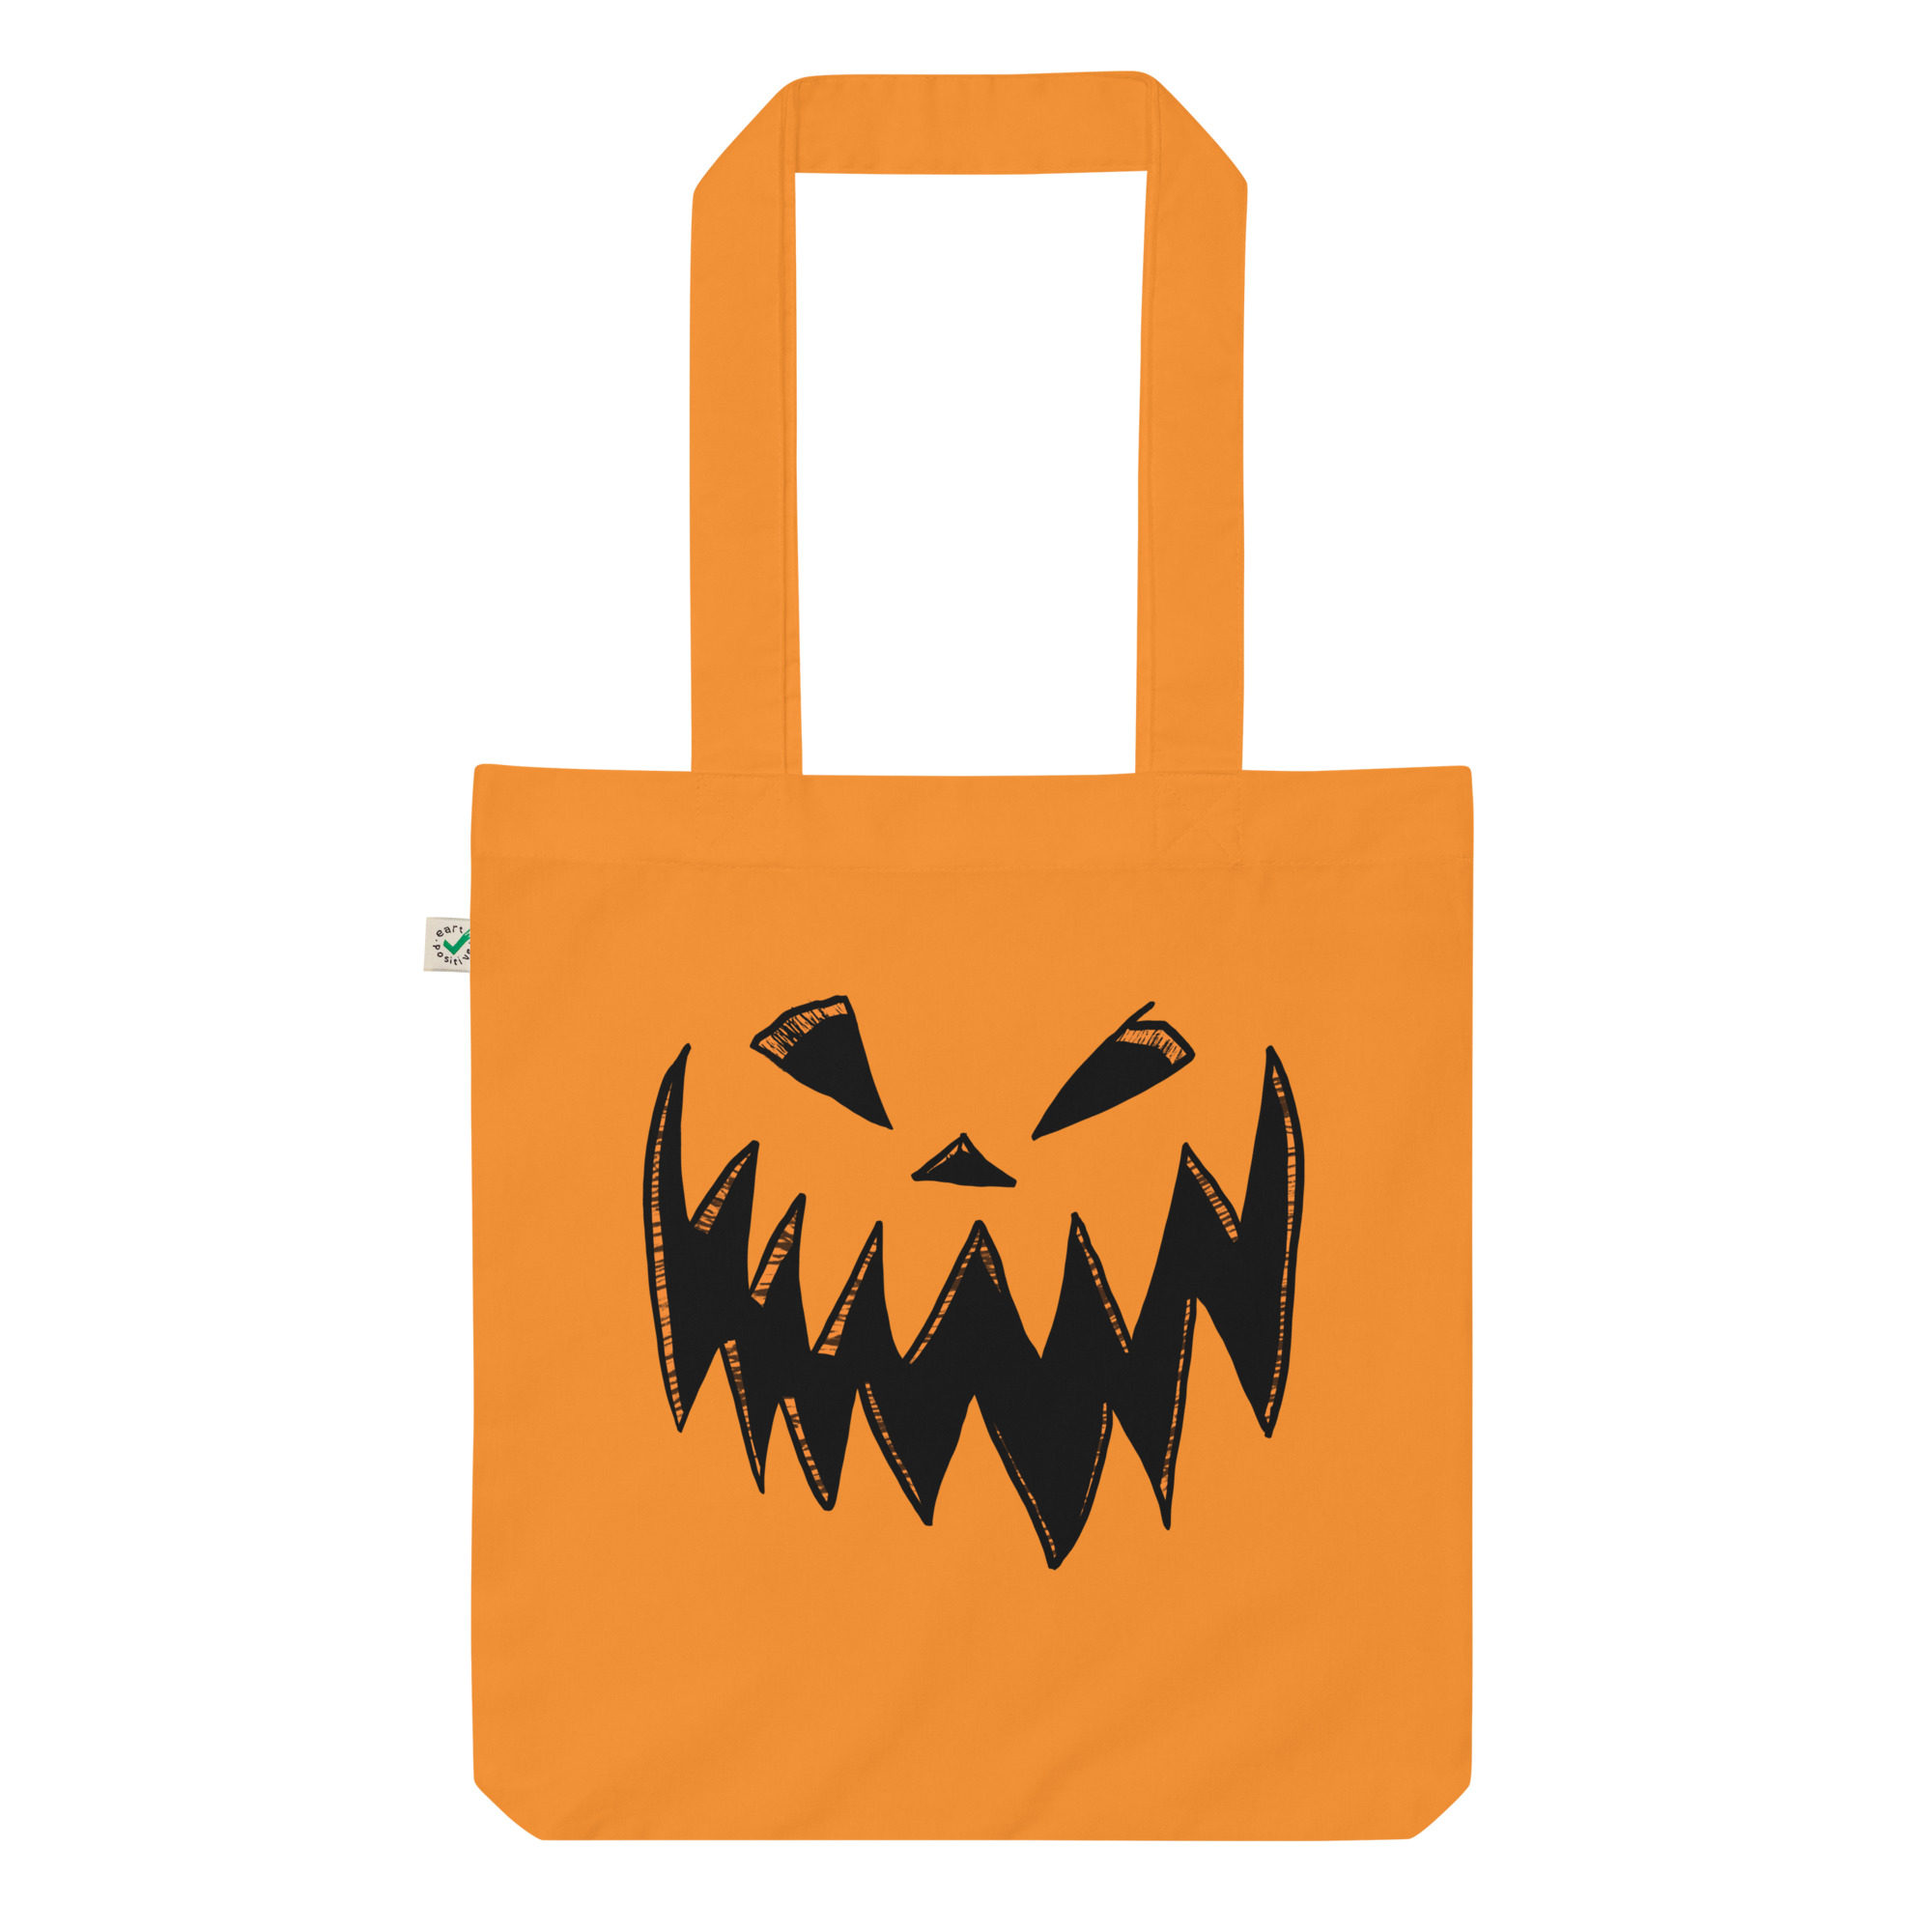 Featured image for “Spooky Pumpkin Face - Organic fashion tote bag”